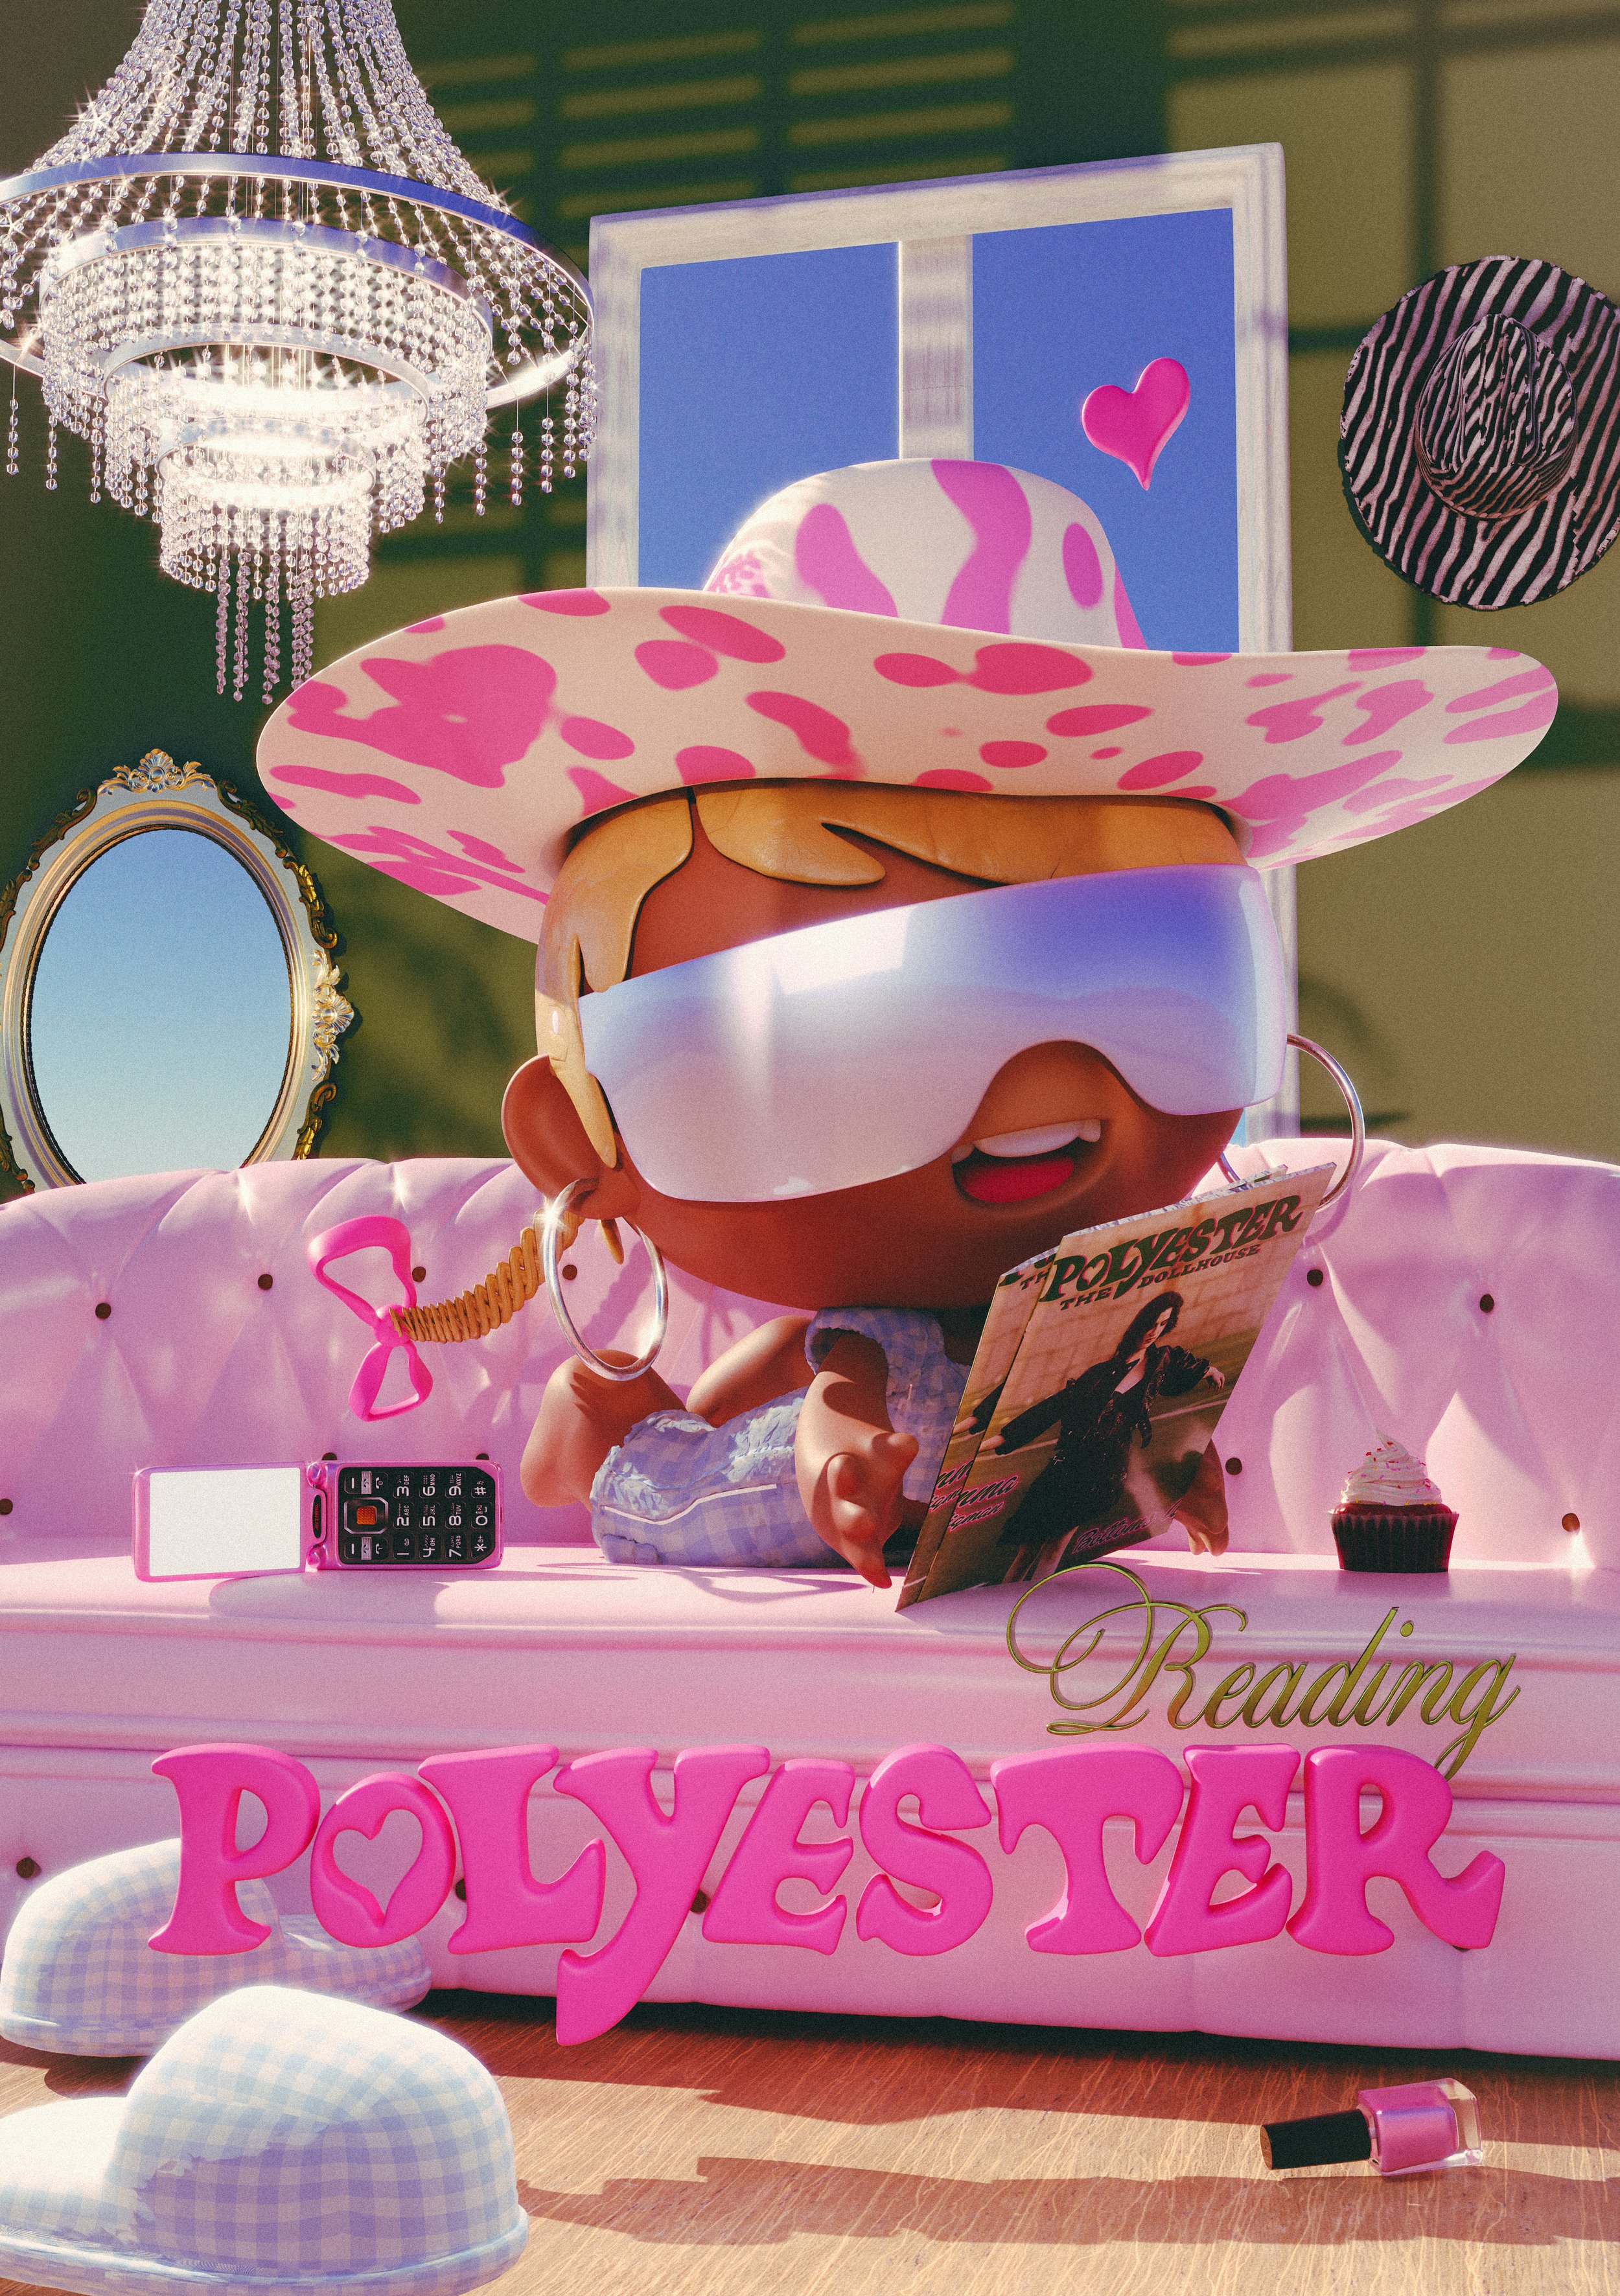 gfx (roblox gfx)  Roblox pictures, Pastel pink aesthetic, Roblox